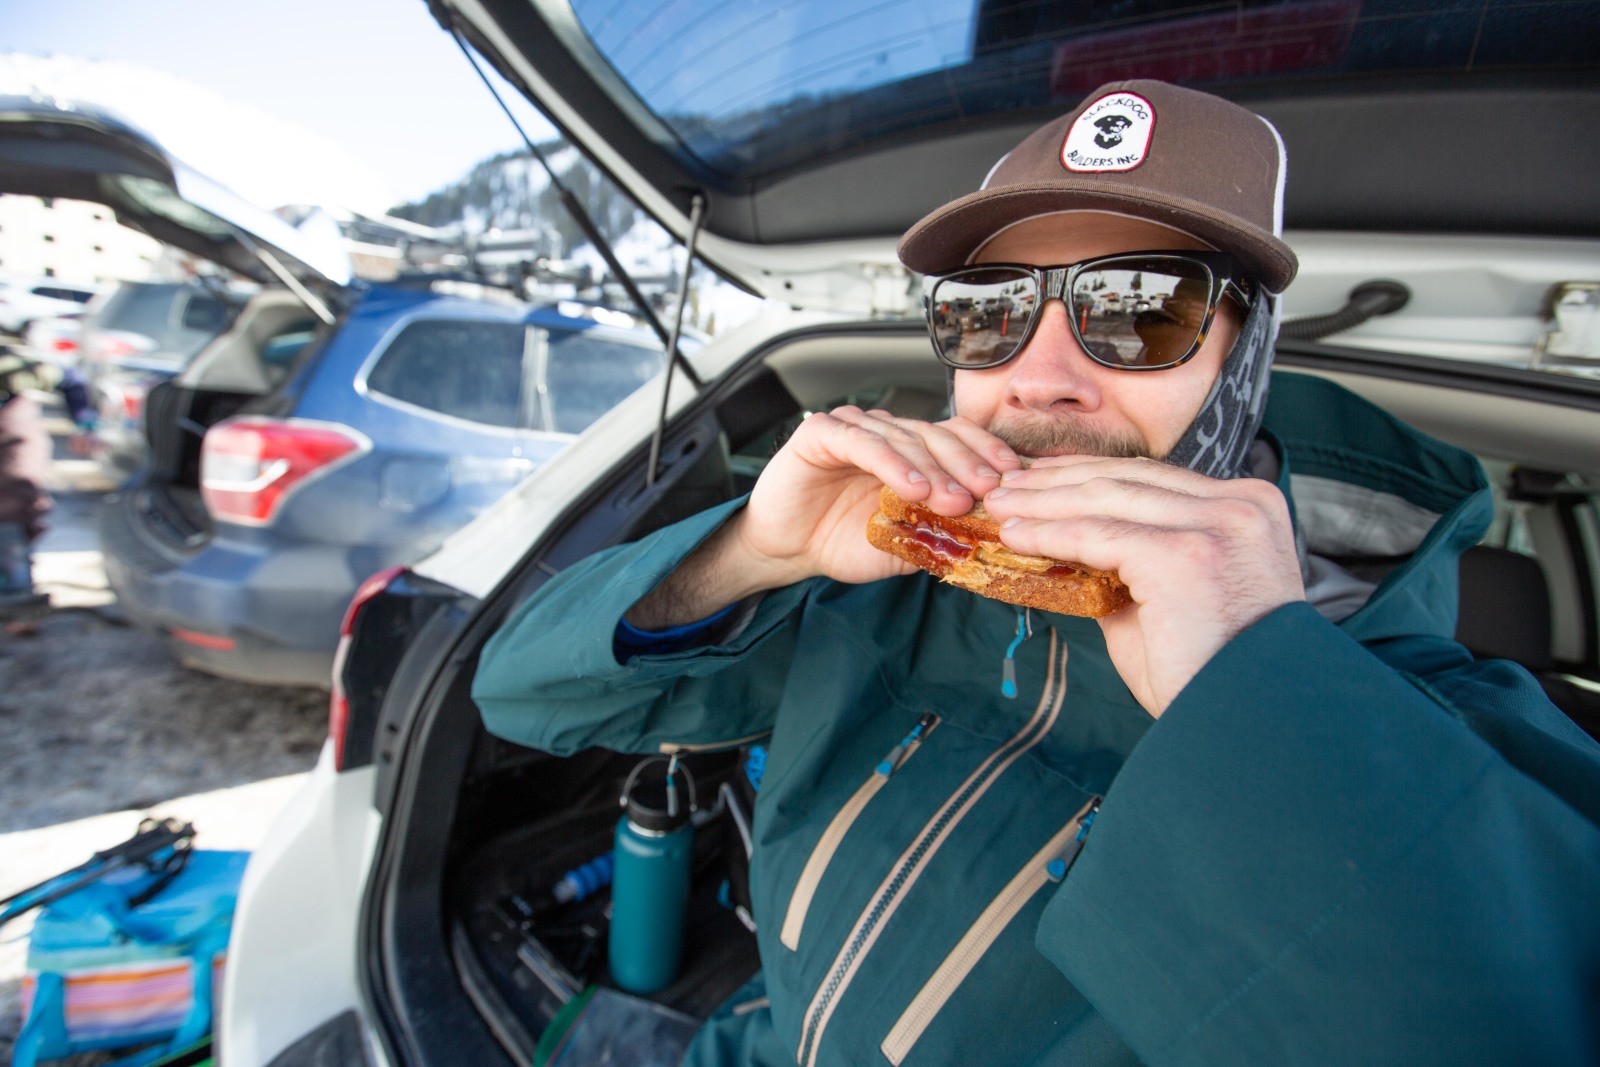 Top 5 Pocket Snacks for Skiing